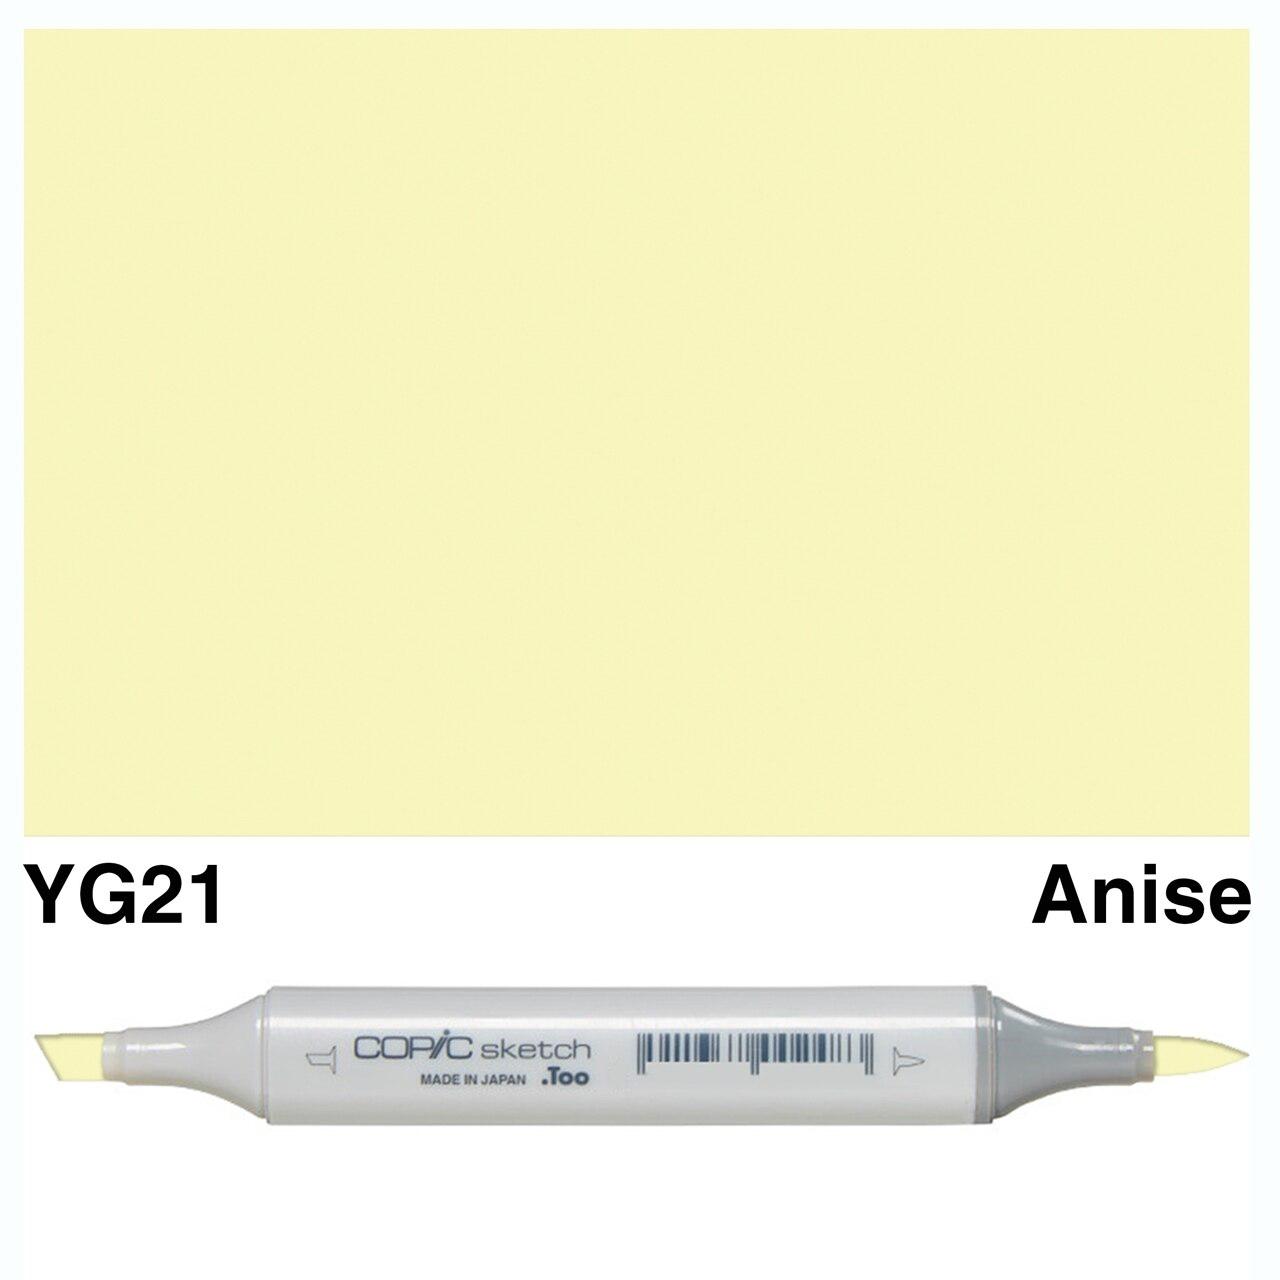 Copic - Sketch Marker - Anise - YG21-Copic Markers-ScrapbookPal